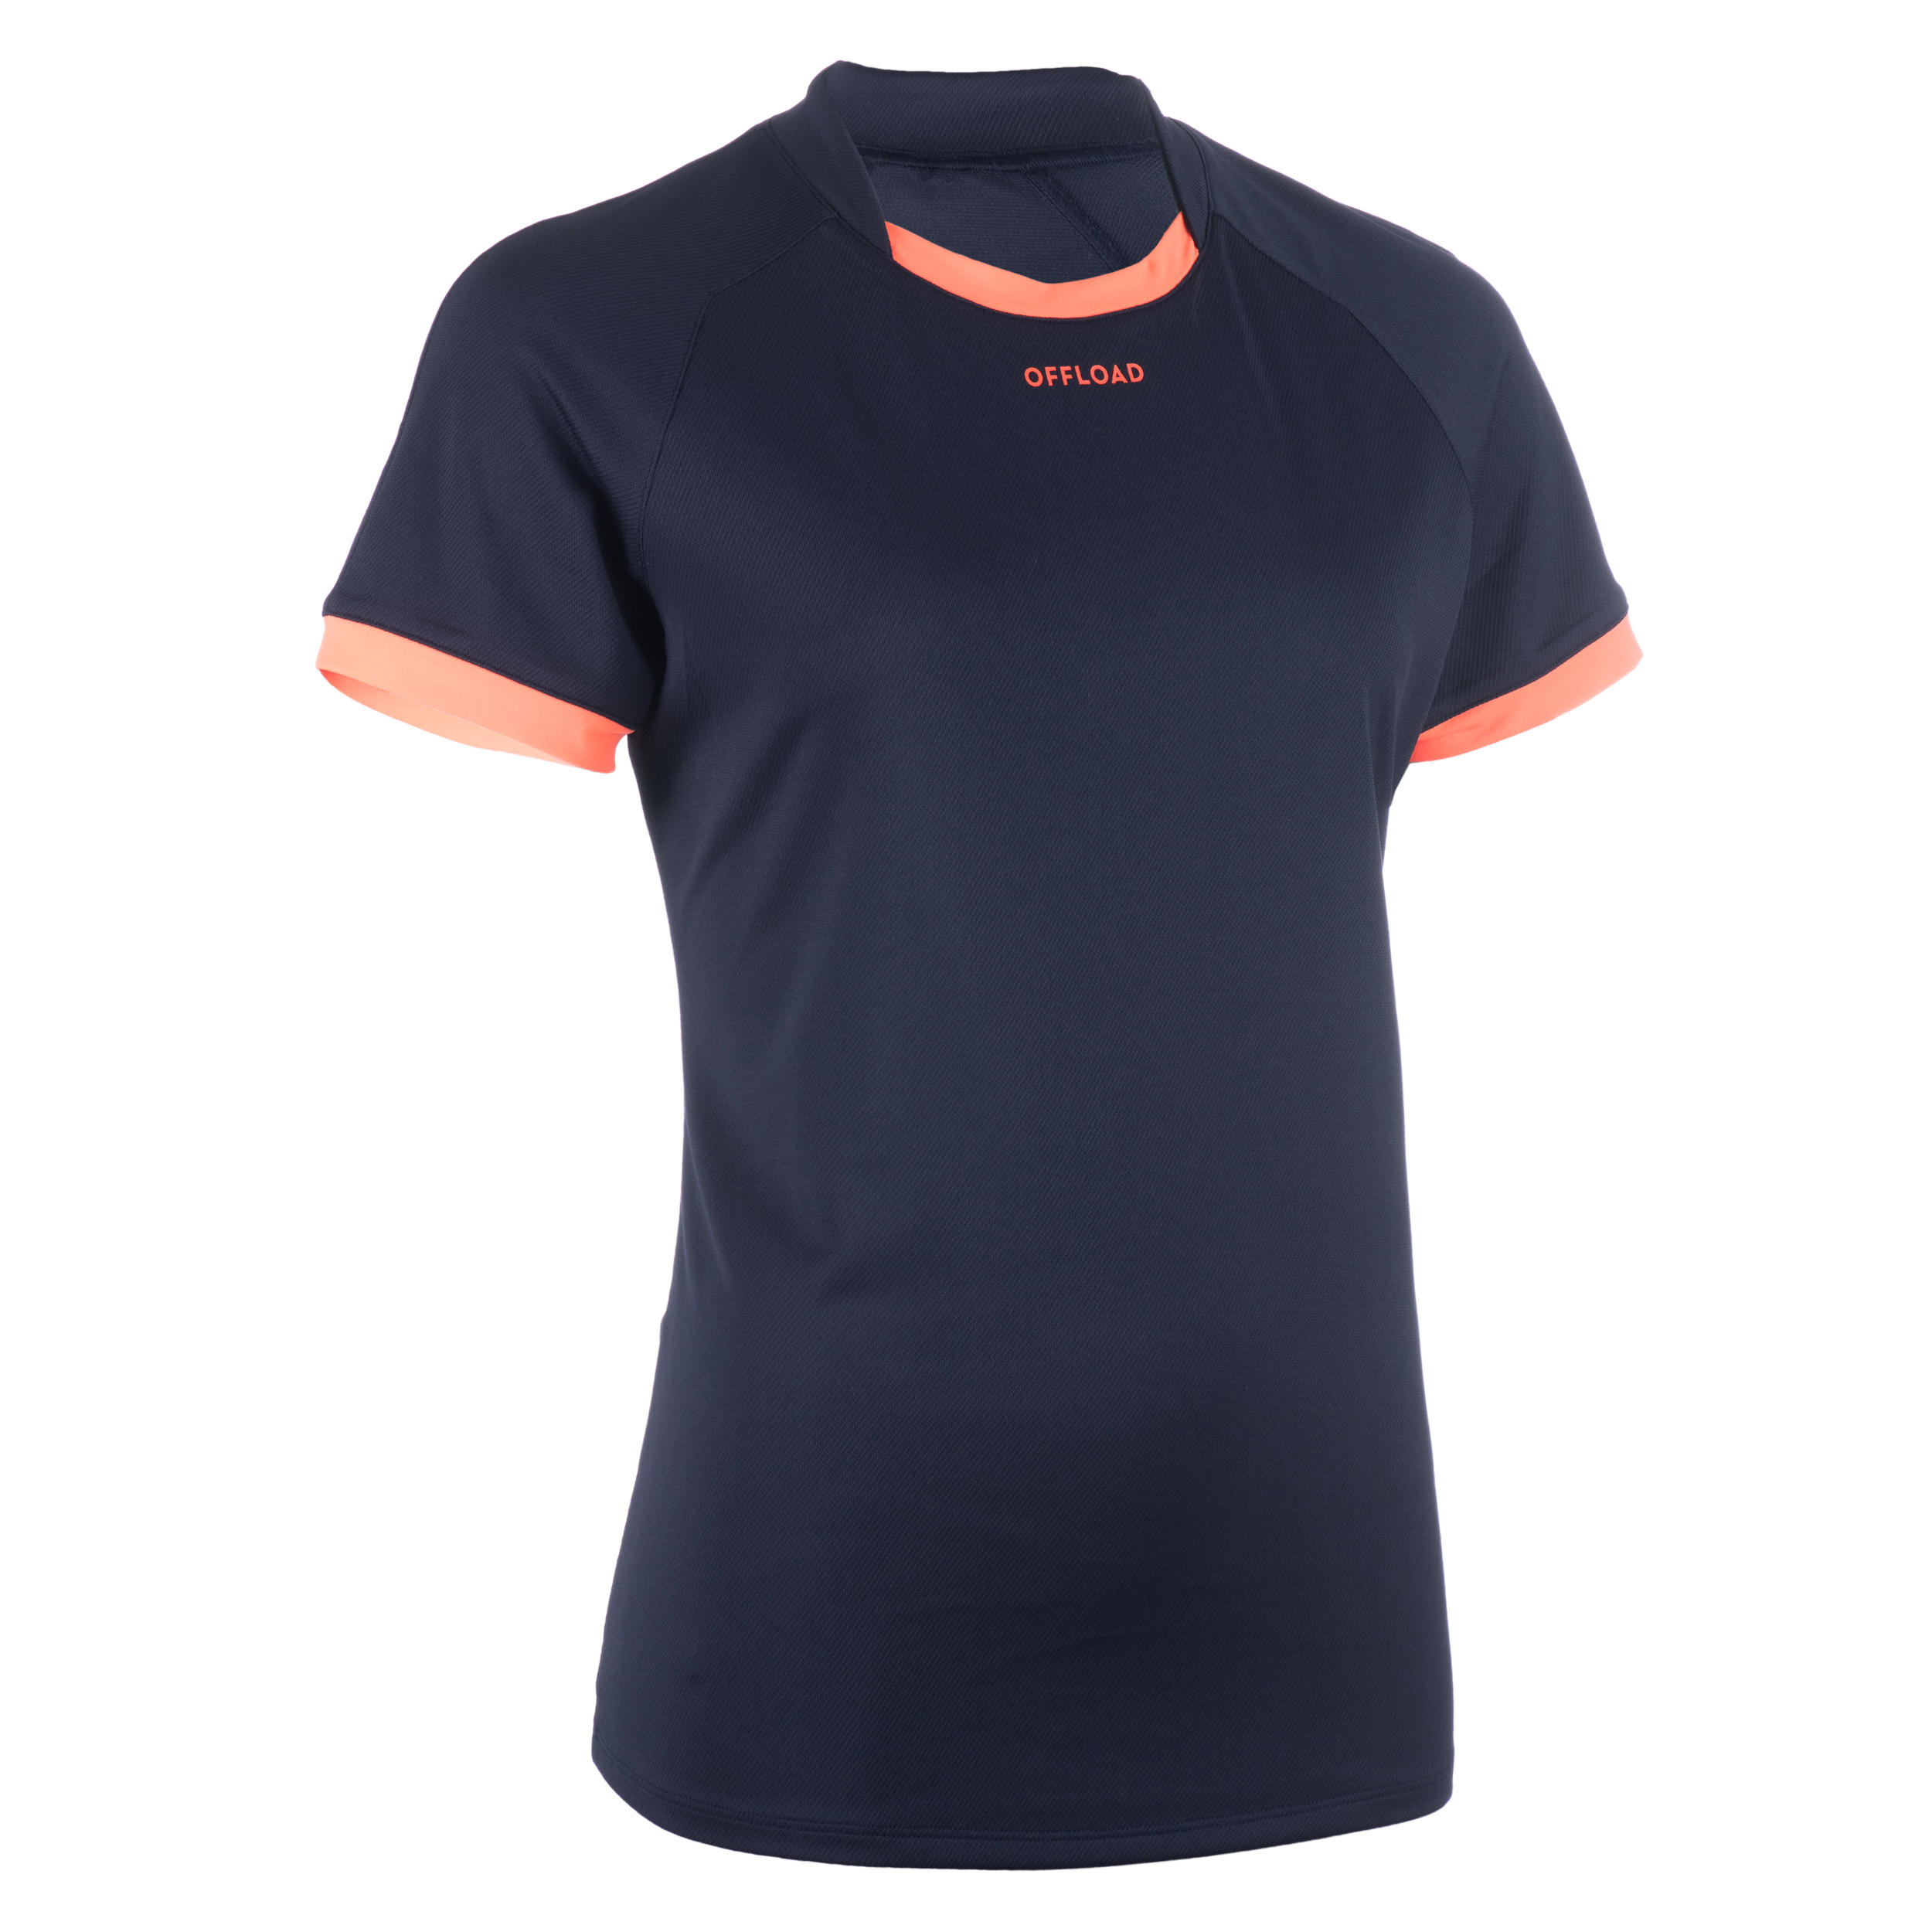 Women's Short-Sleeved Rugby Jersey R100 - Navy Blue/Coral 1/7